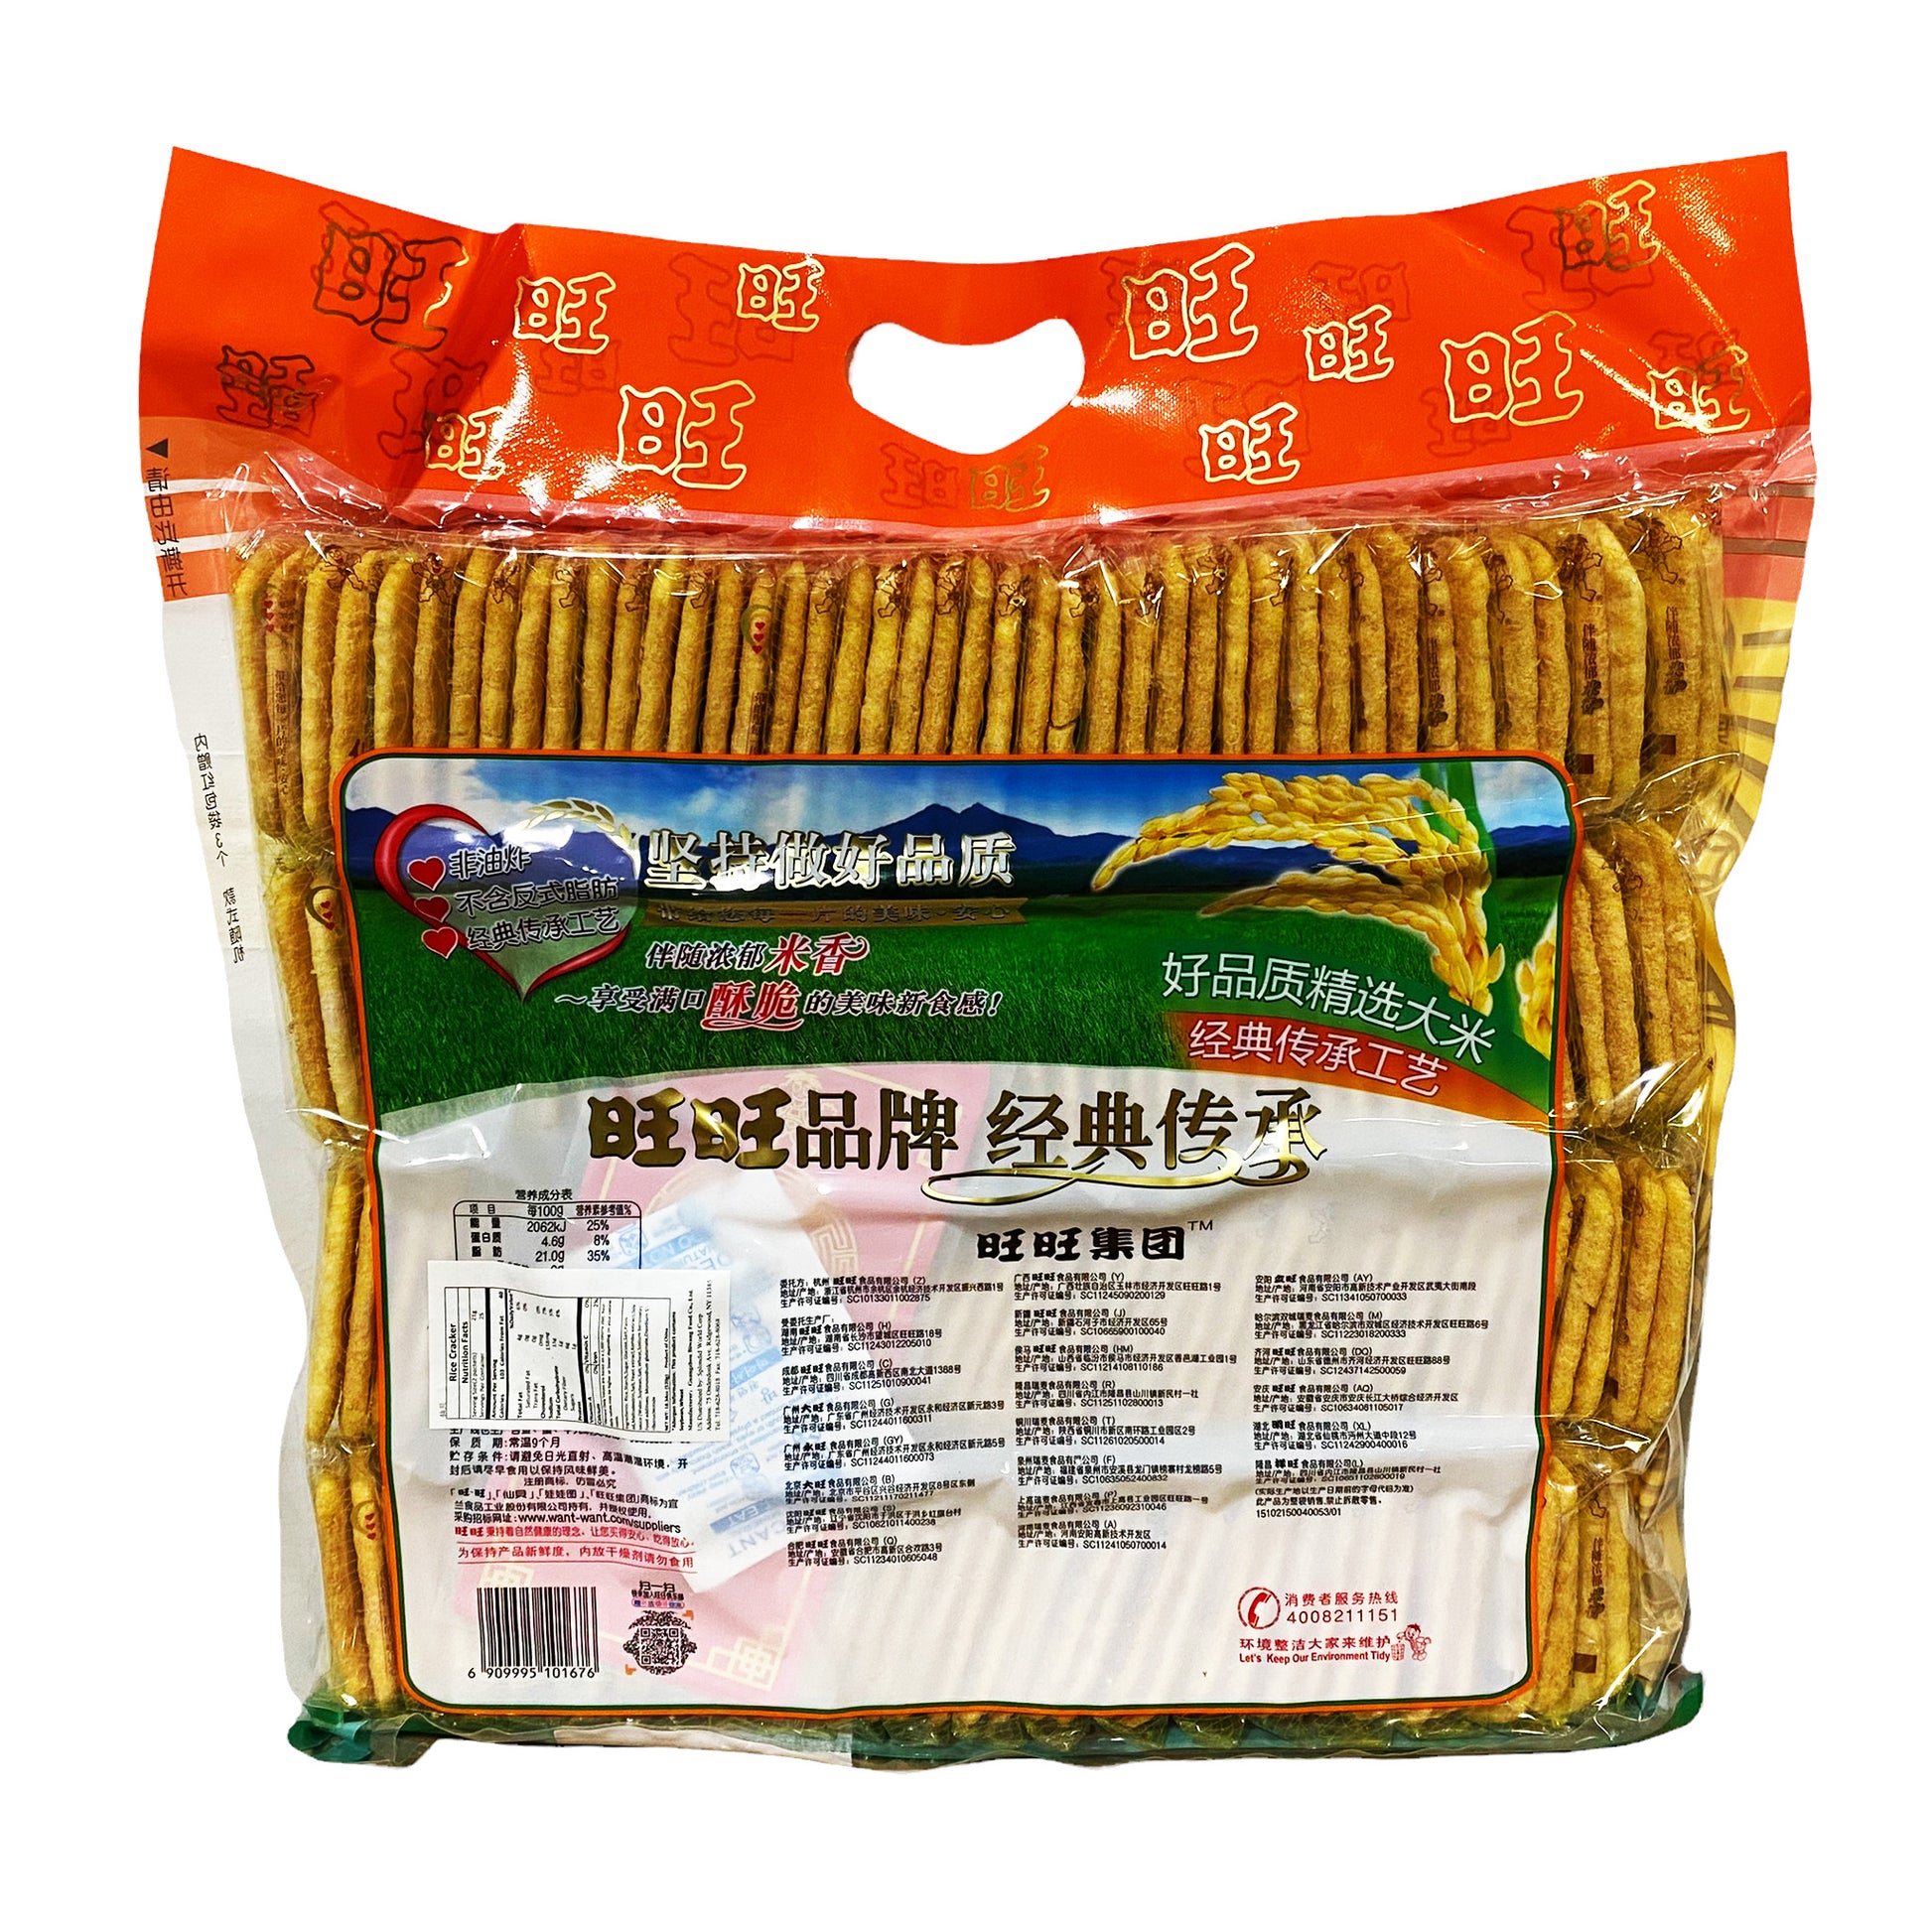 Back graphic image of Want Want Rice Crackers Senbei Family Pack 18.32oz - 旺旺 仙貝分享包 18.32oz